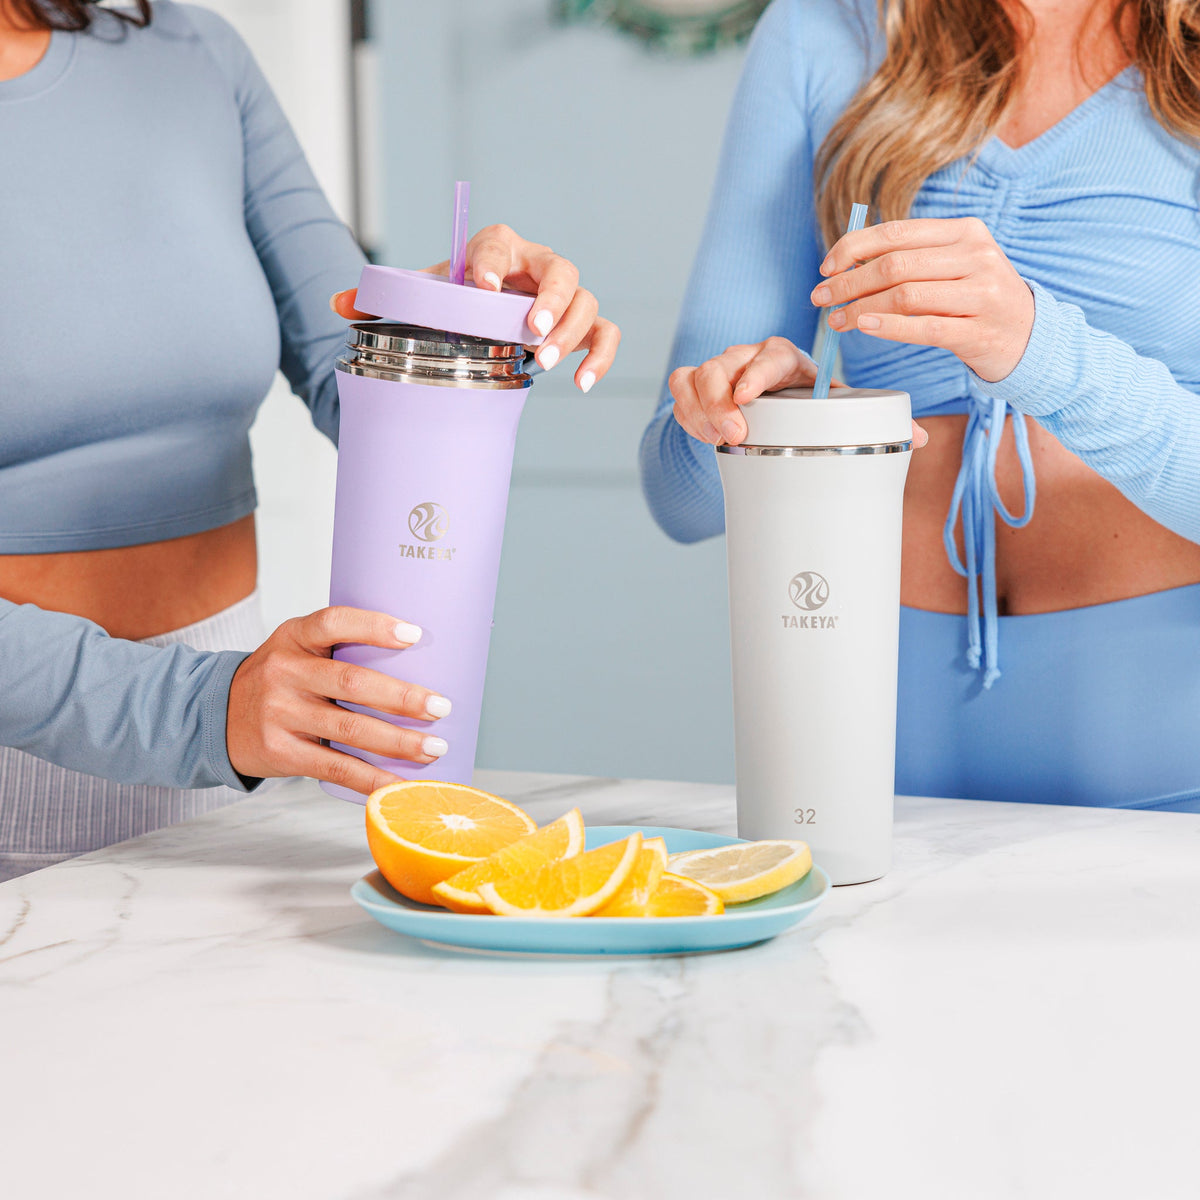 Cupture Stainless Steel Skinny Insulated Tumbler Cup with Lid and Reusable  Straw - 16 oz (Powder Blue)